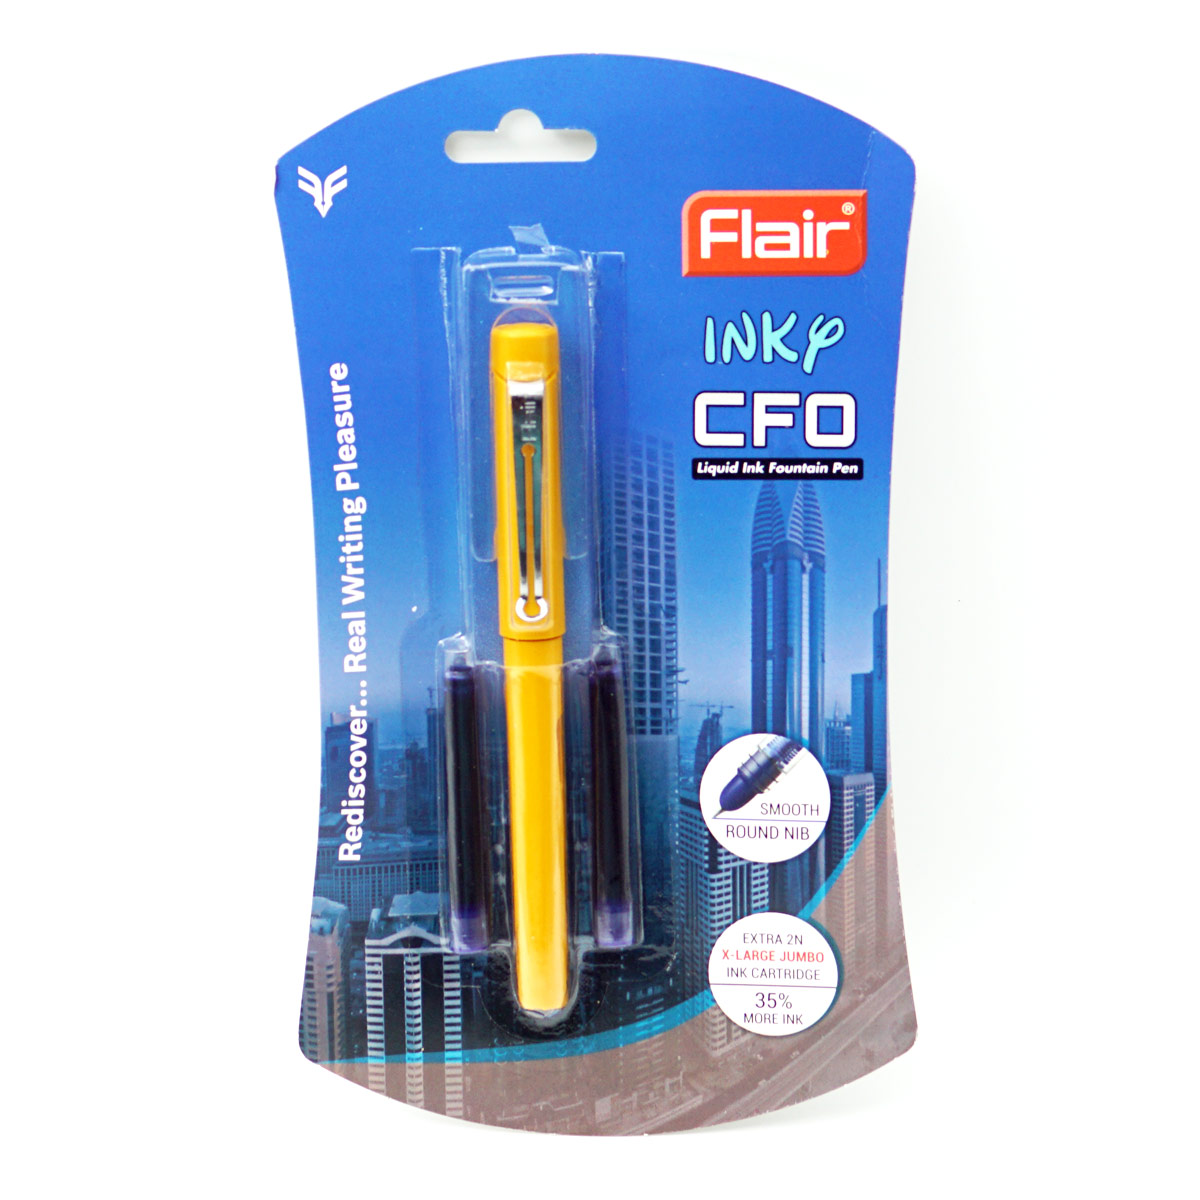 Flair Inky CFO Model:15598 Yellow Color Body with Cap Type and 2 Ink Catridge Fine Nib Fountain Pen